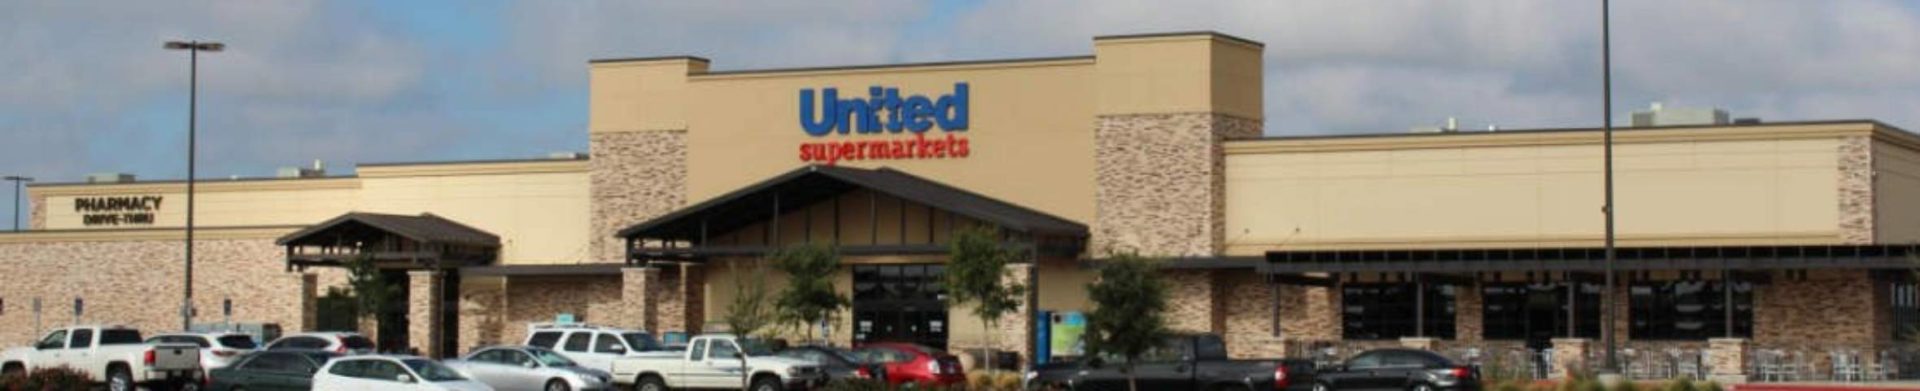 a United Supermarkets location